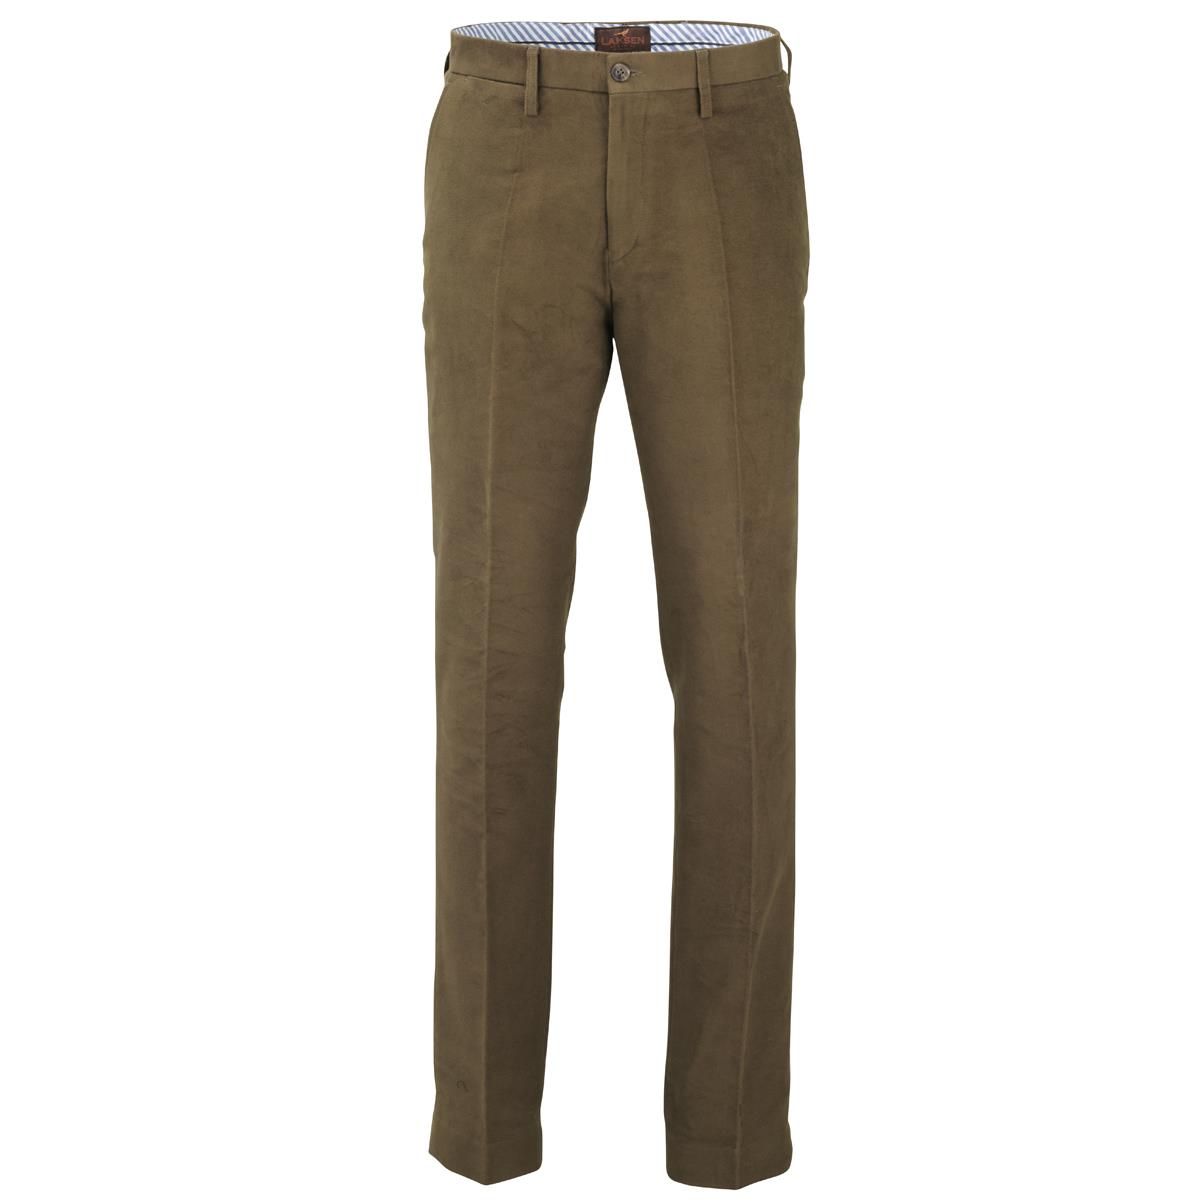 Laksen Mens Broadlands Trousers Questions & Answers